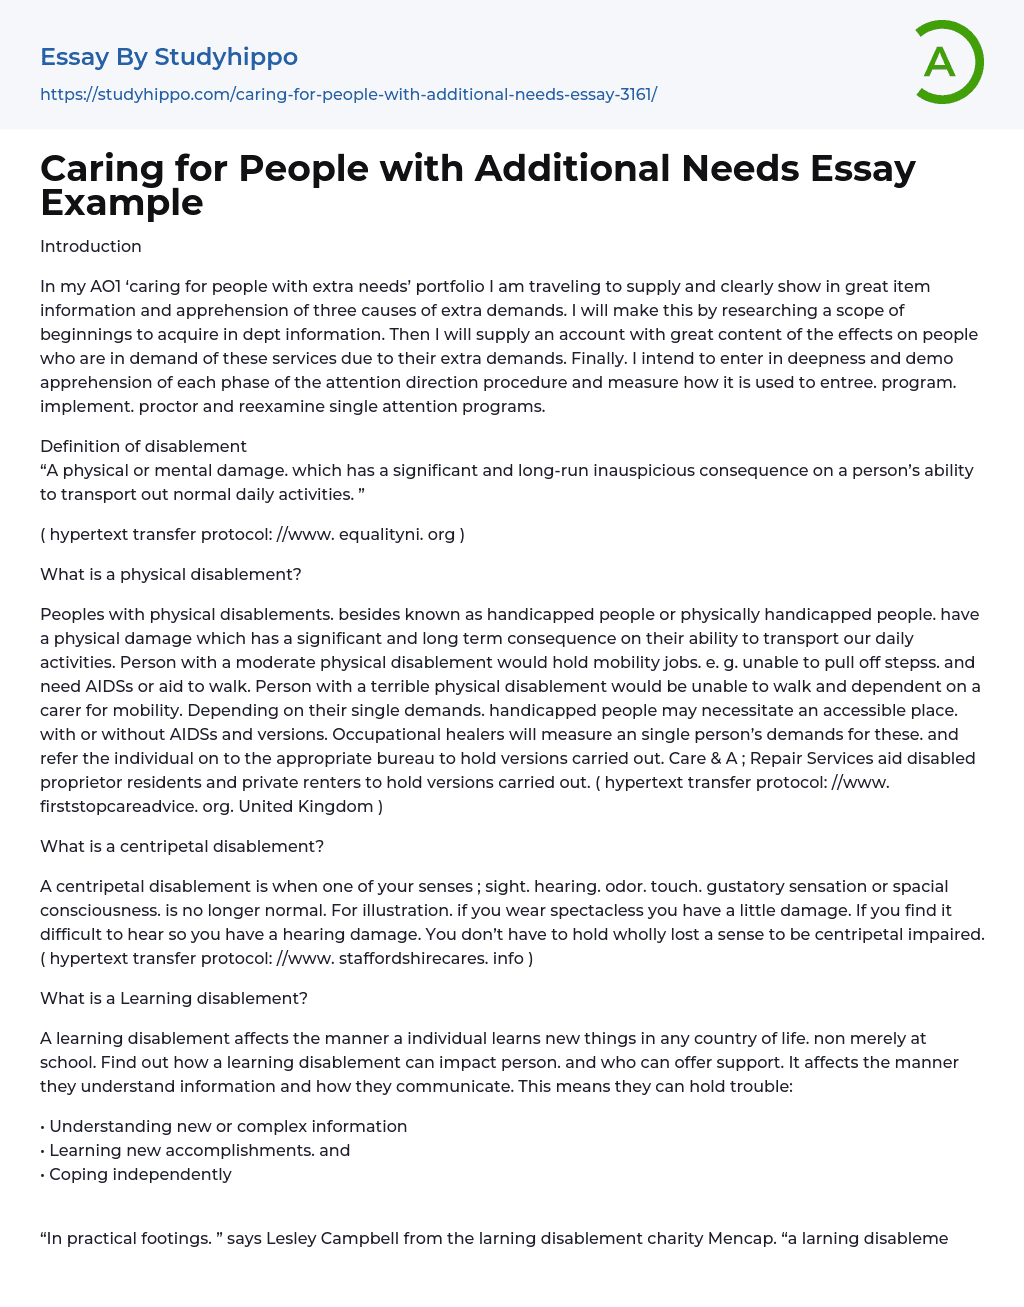 Caring for People with Additional Needs Essay Example